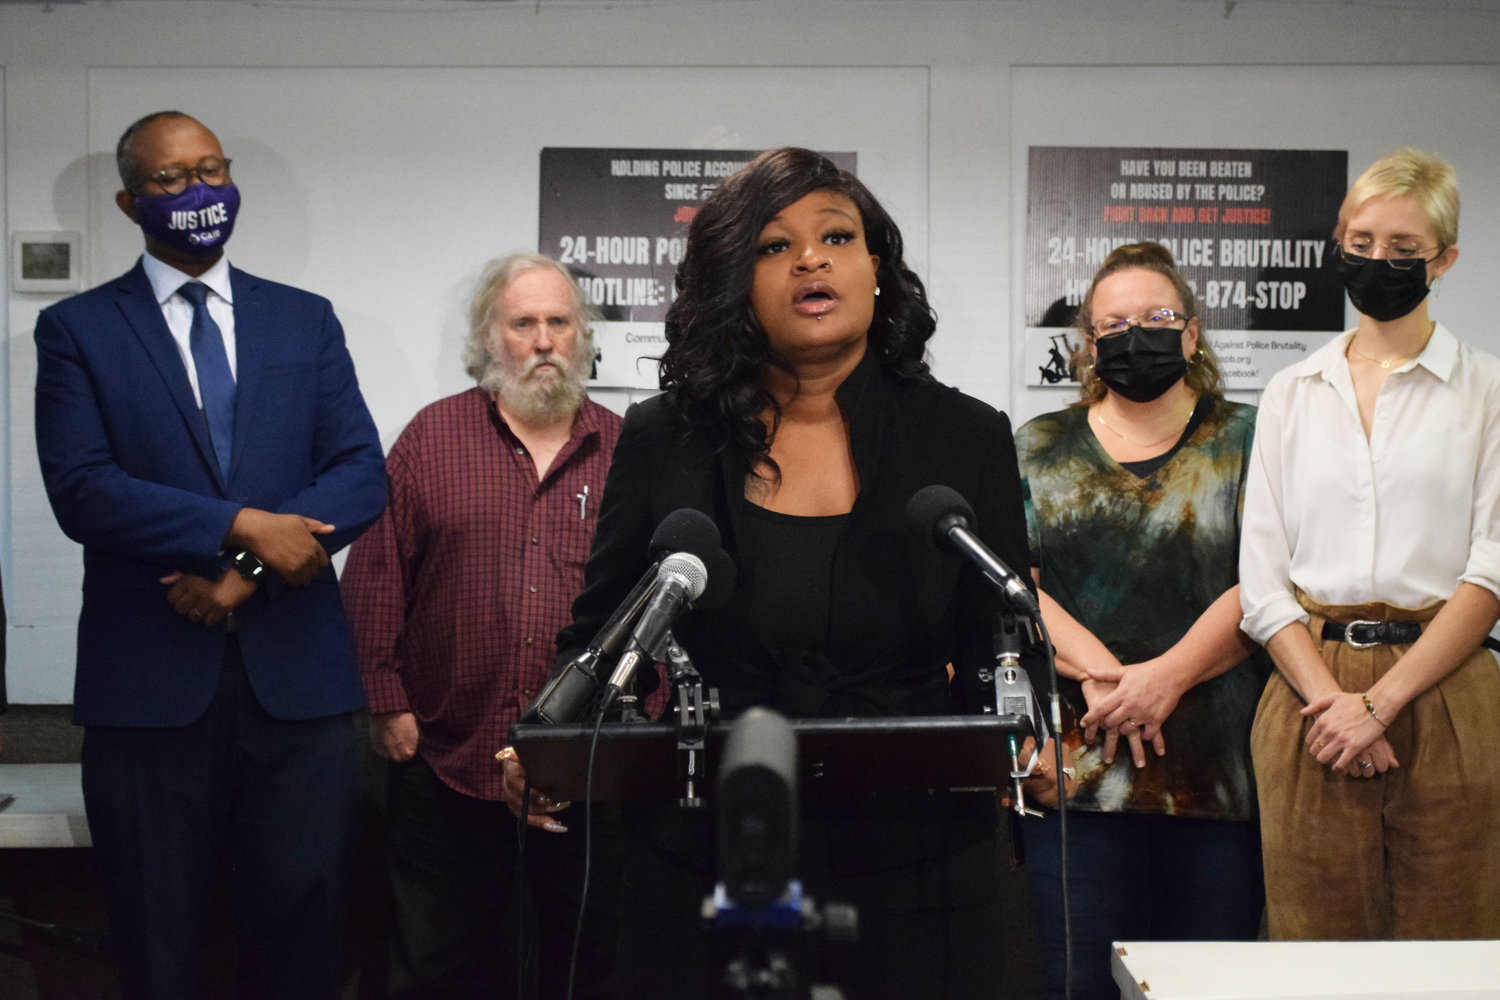 Toshira Garraway, founder of Families Supporting Families Against Police Violence and fiancé of Justin Teigen who was killed by St. Paul police in 2009, urged the DOJ to investigate the Bureau of Criminal Apprehension and other cities following its work in Minneapolis.